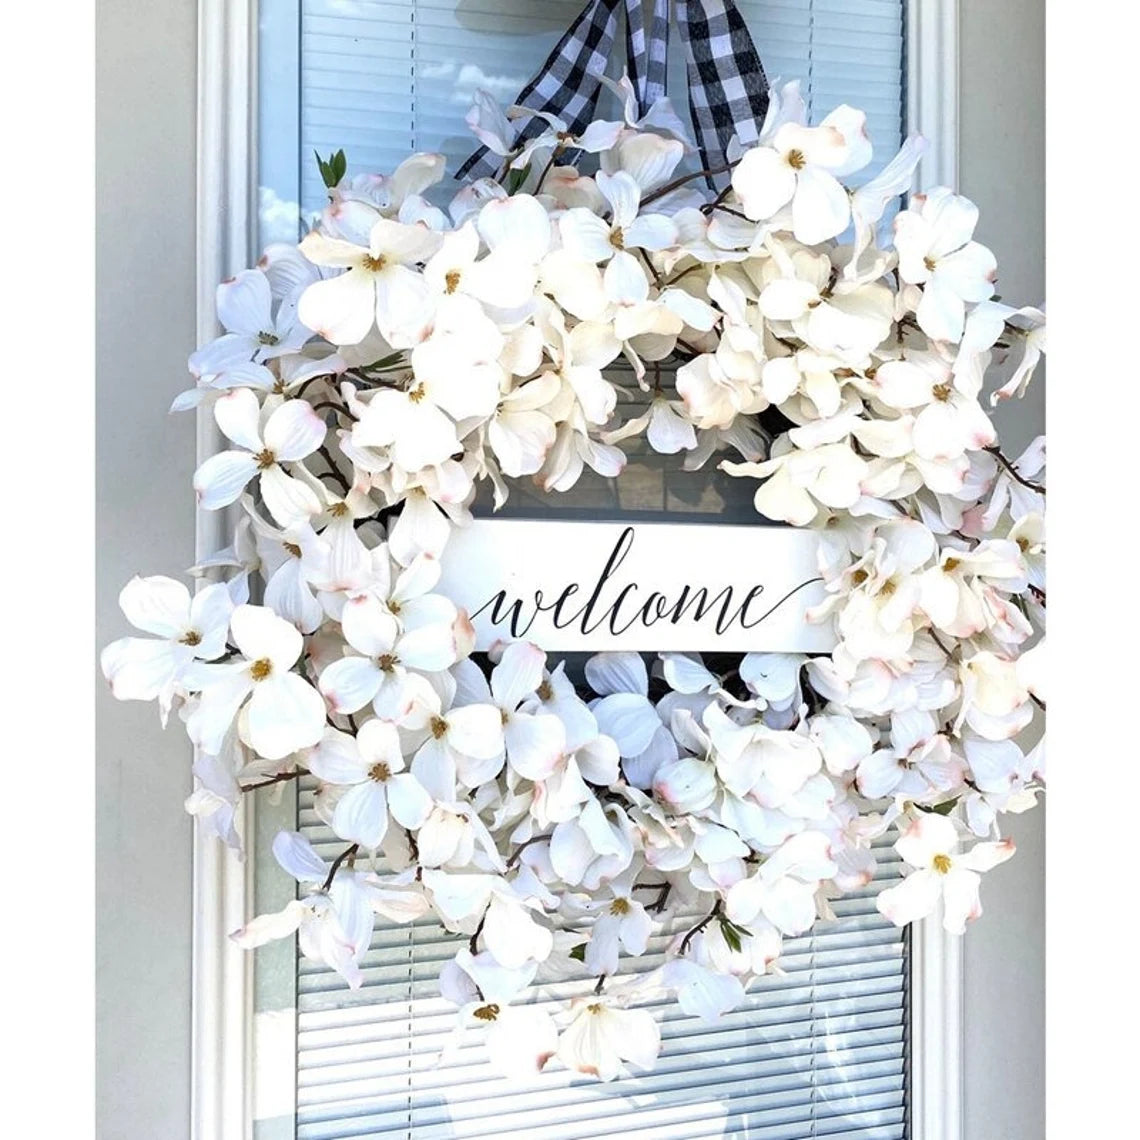 [Suitable all year round/Easter]The most beautiful wreath in the worldPure white dogwoood wreath